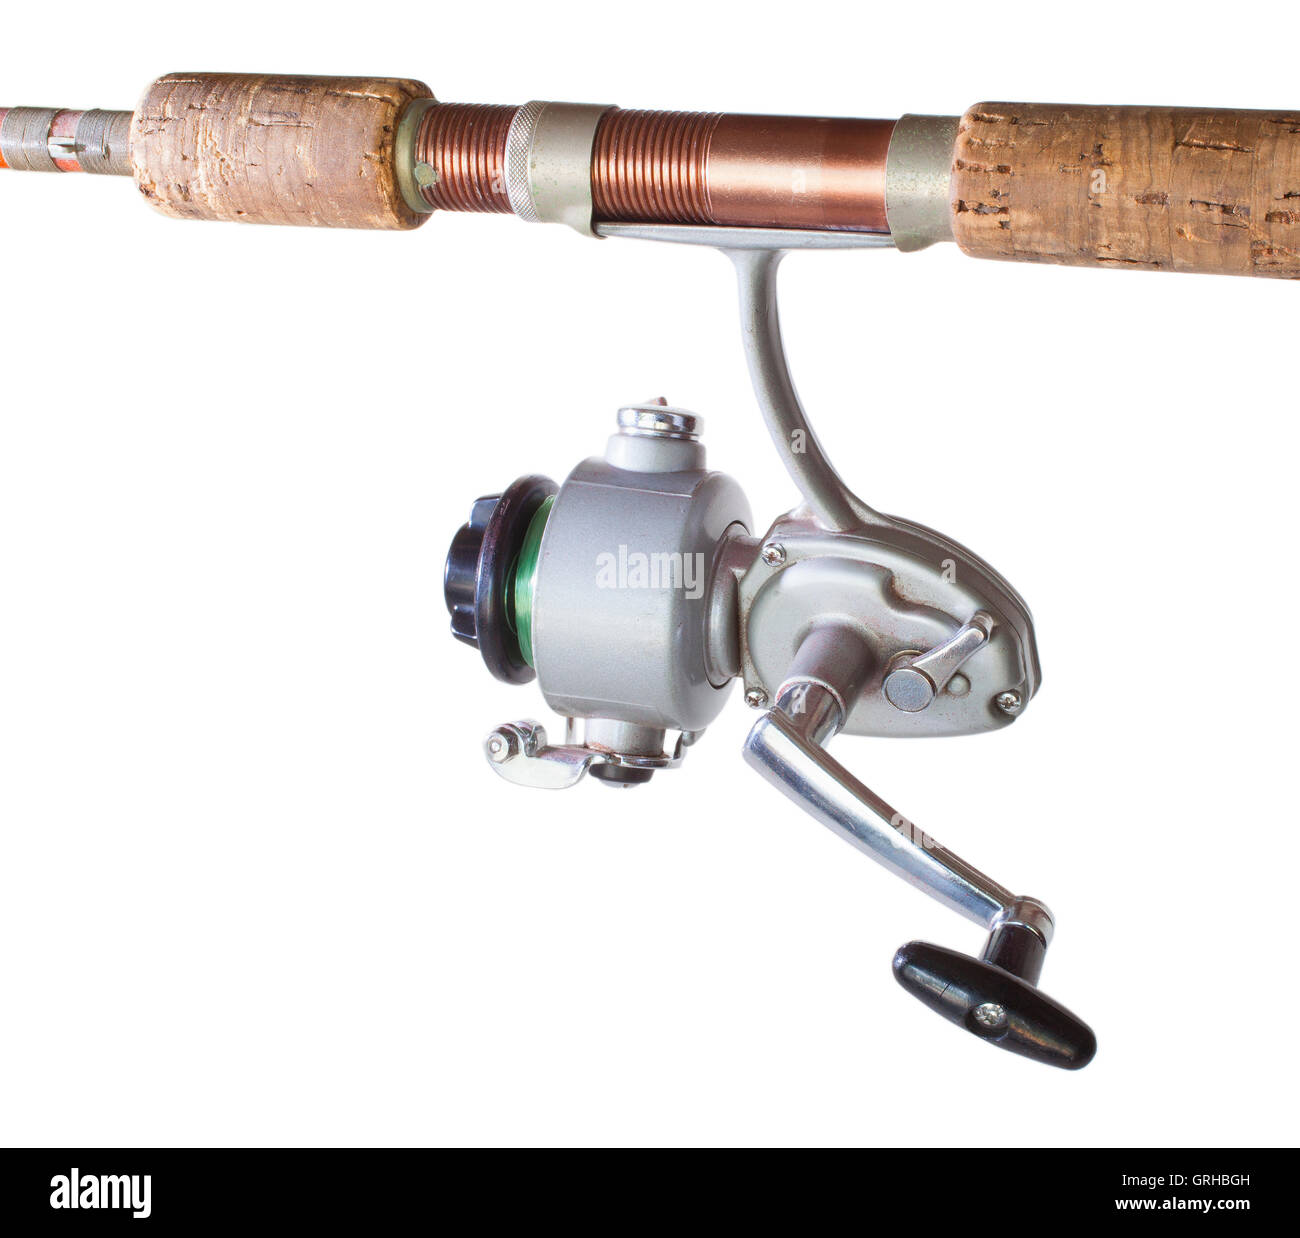 https://c8.alamy.com/comp/GRHBGH/spinning-reel-made-out-of-metal-on-a-rod-isolated-on-white-GRHBGH.jpg